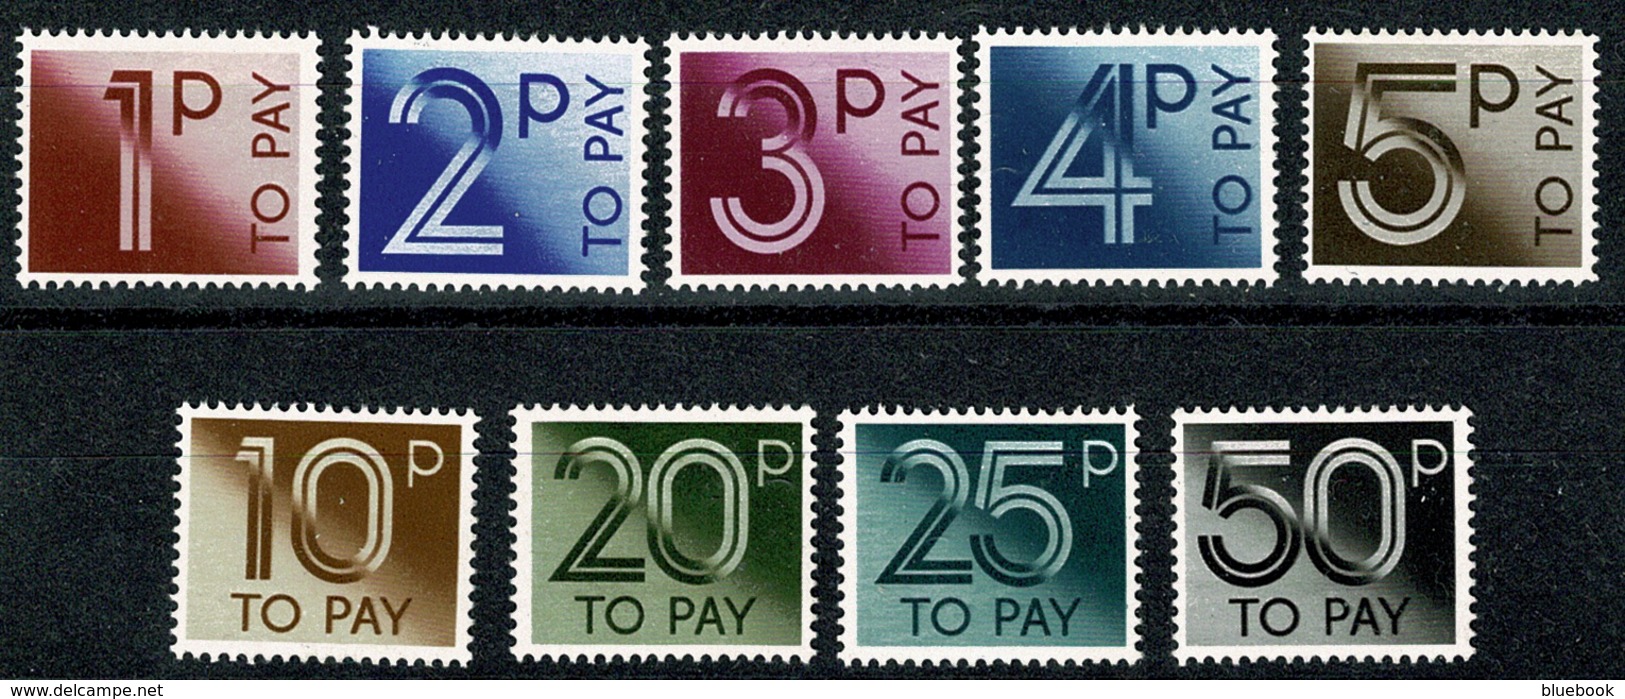 Ref 1292 - GB 1982 Postage Due Set Of Stamps - Mint - SG 90-101 - Taxe